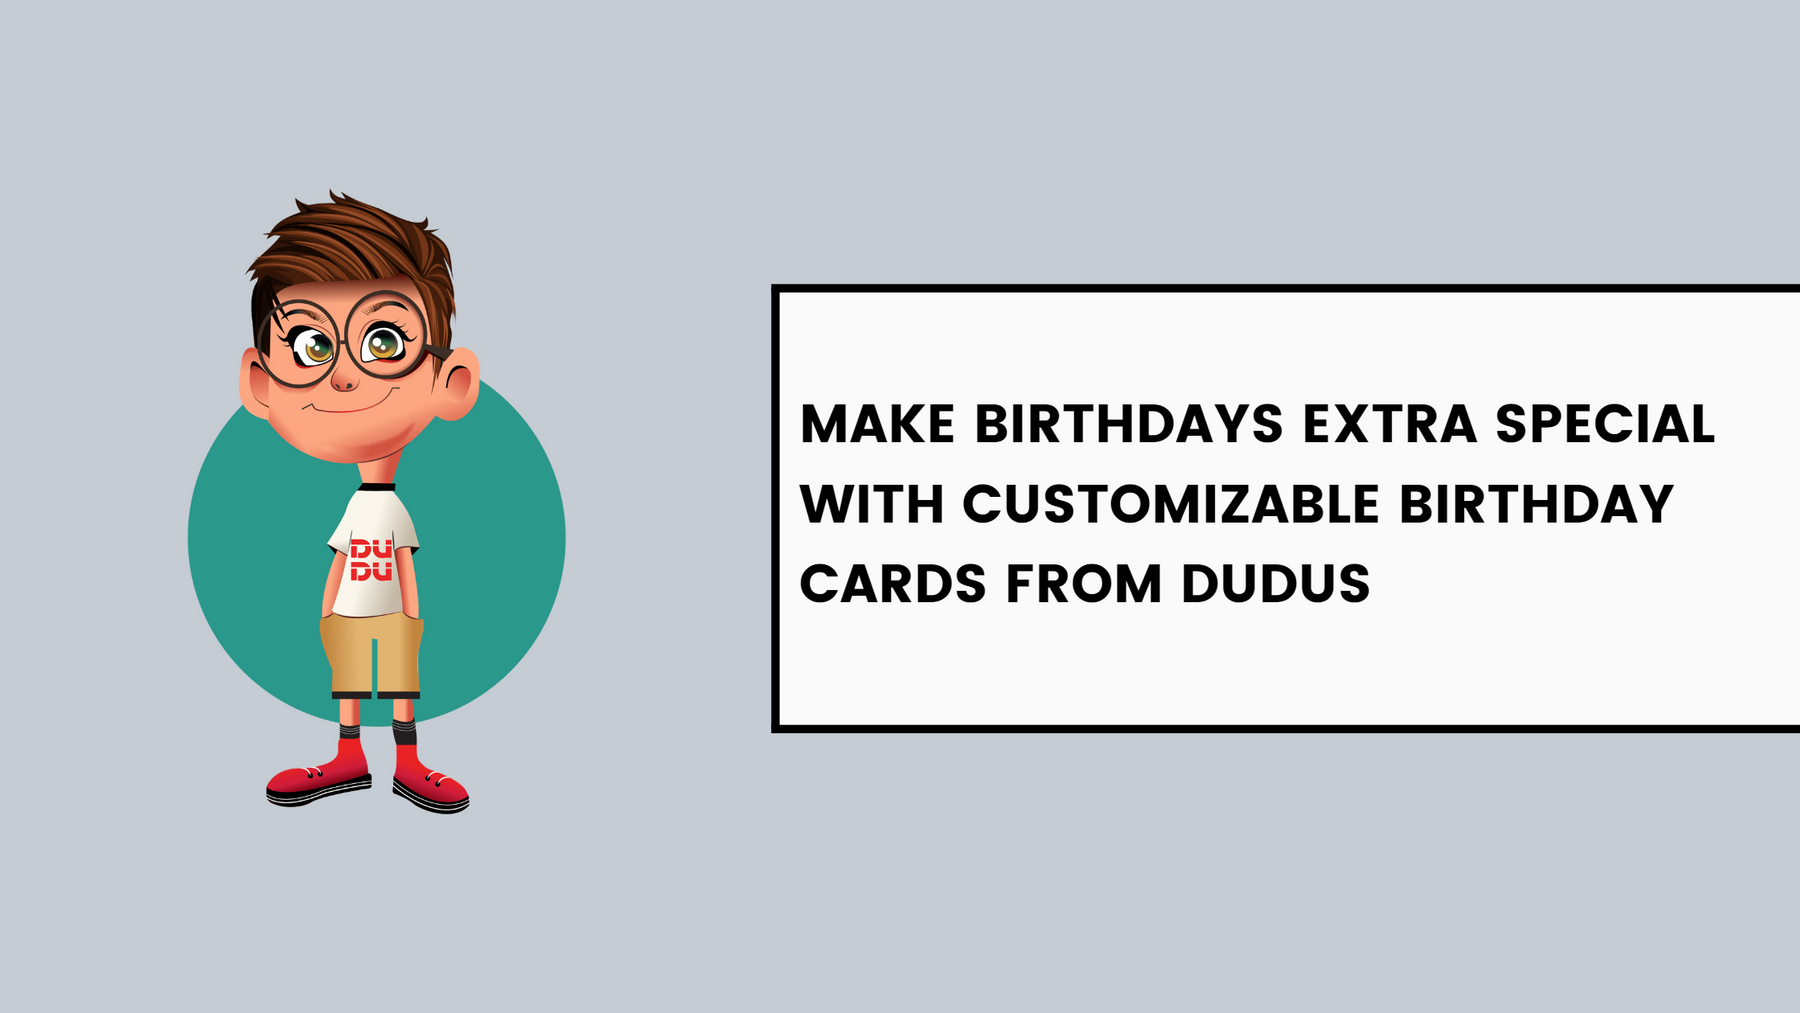 Make Birthdays Extra Special with Customizable Birthday Cards from Dudus